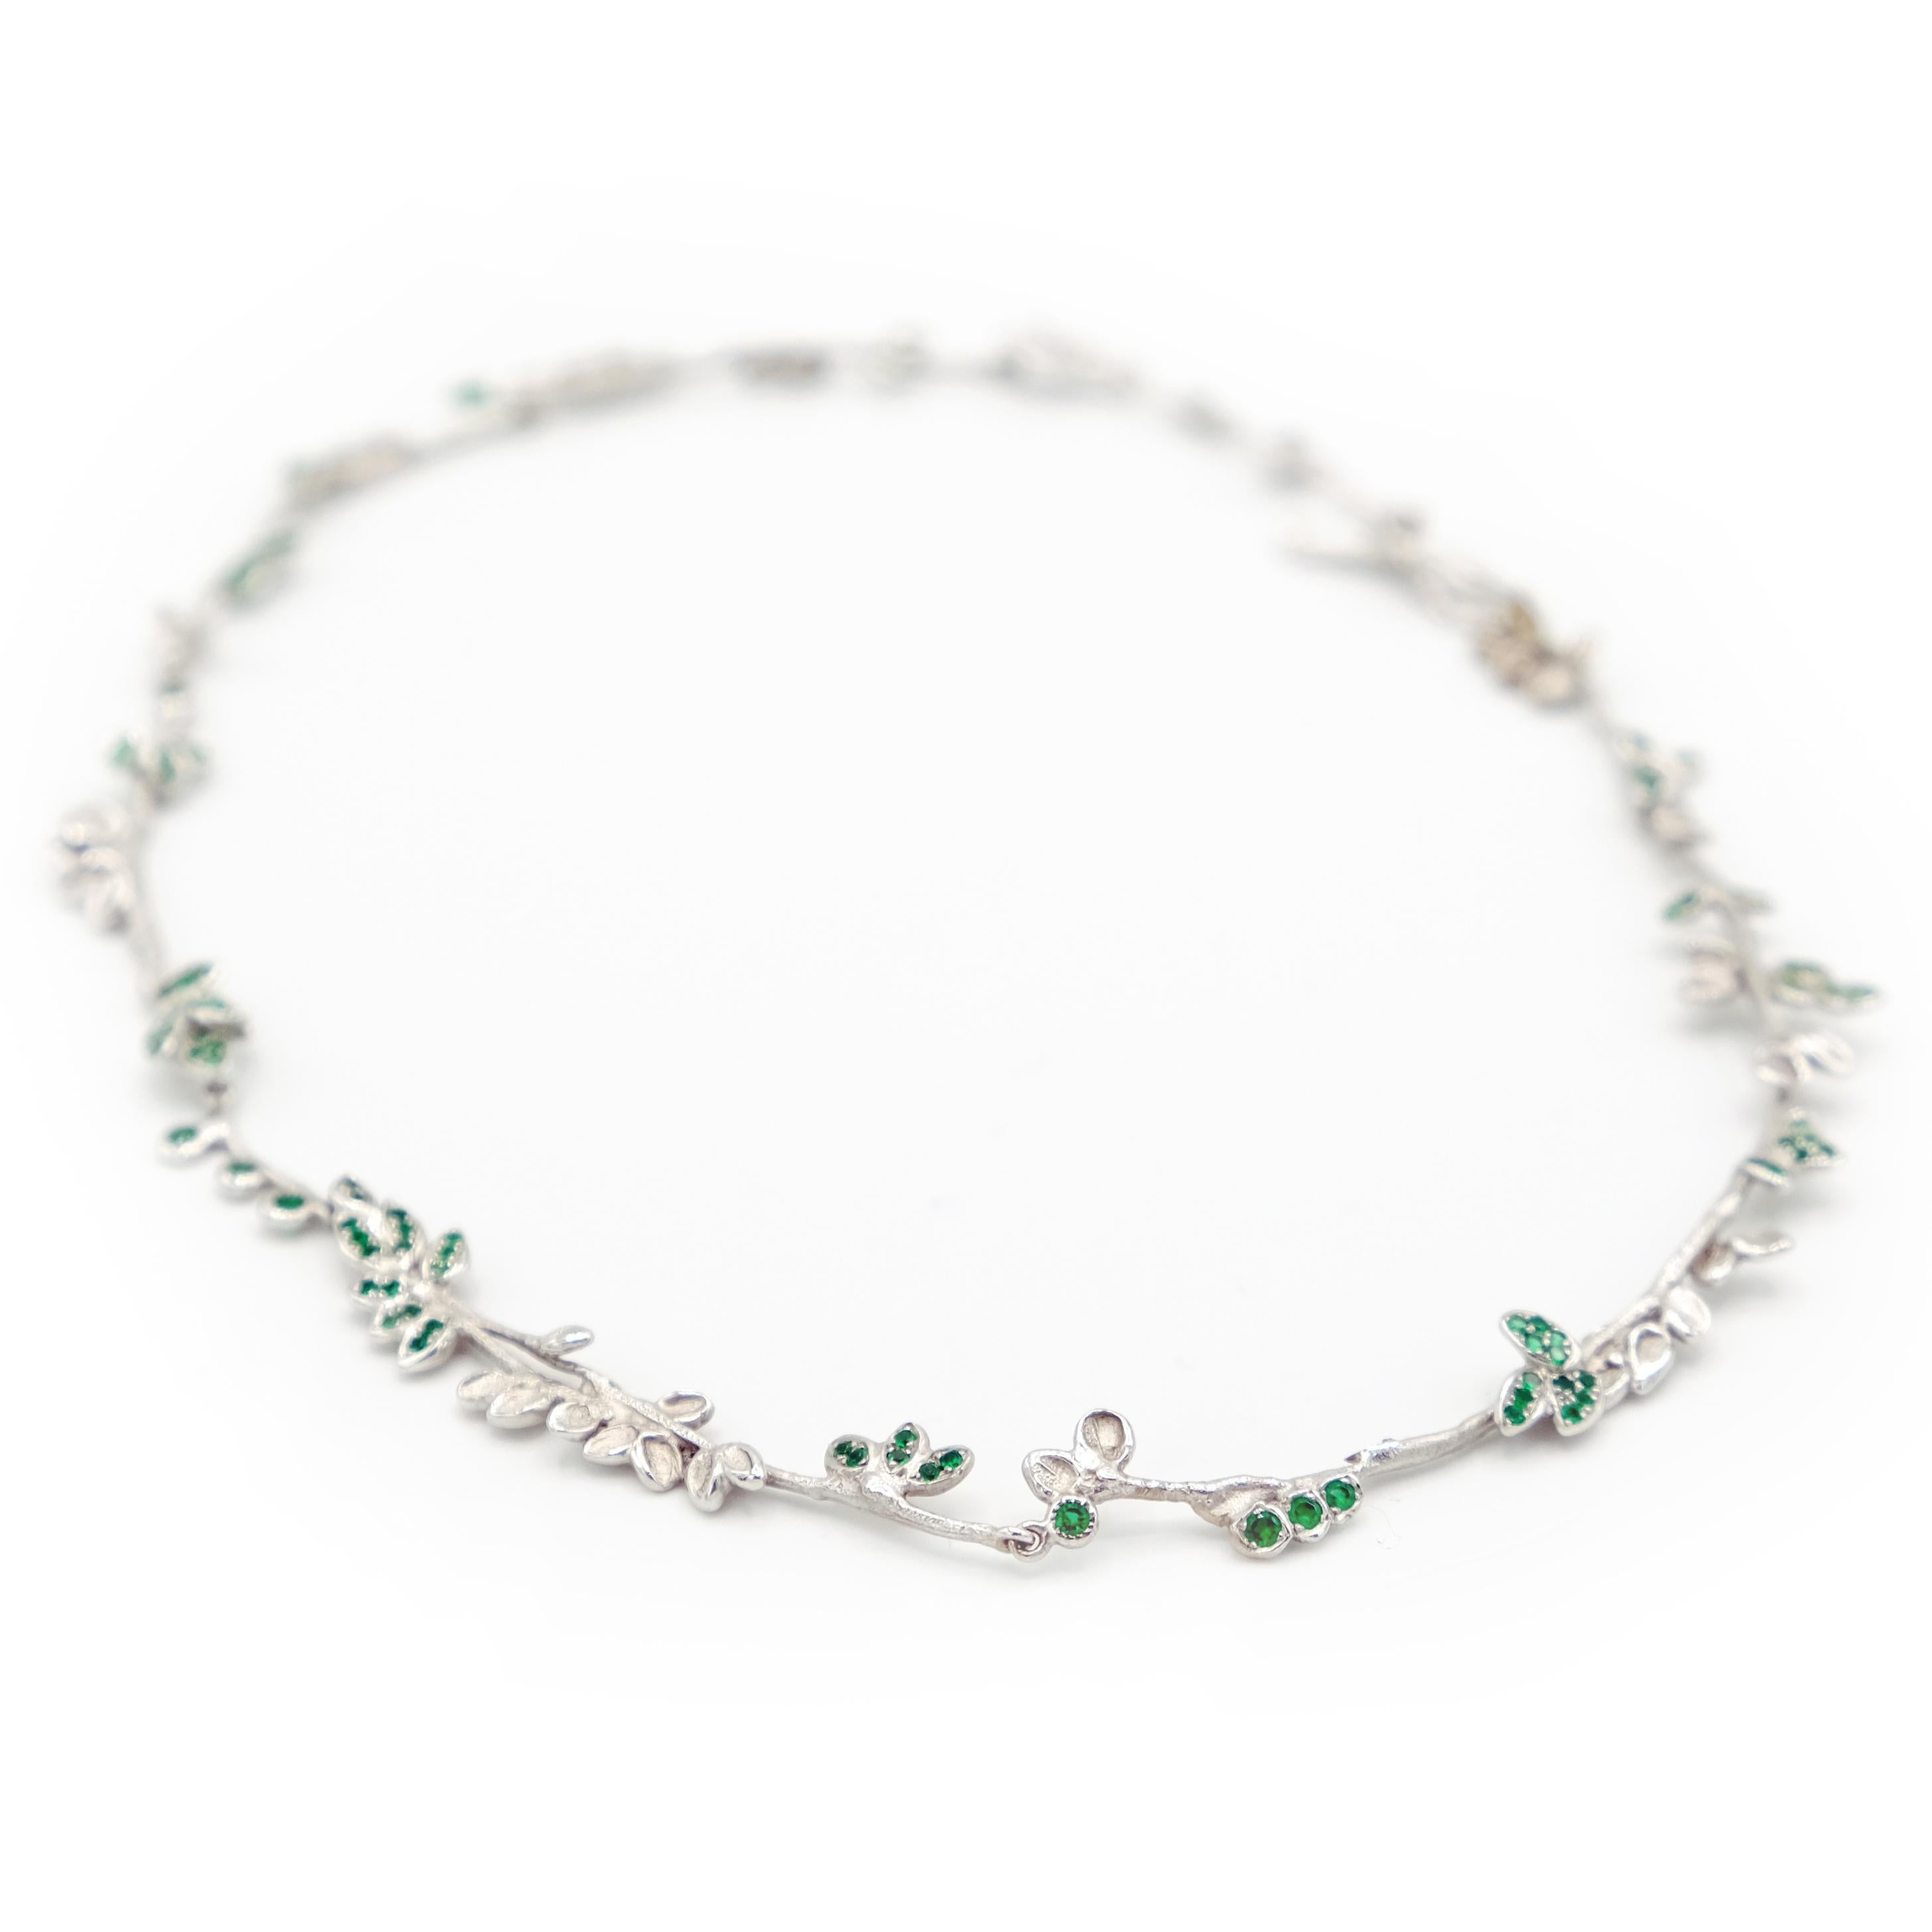 This one-of-a-kind necklace is expertly crafted by hand from 18 Karat white gold approximately 27 grams, set with glittering emeralds total 1.71 carats. 
It is entirely articulated for great comfort. It has a hand made T-bar fastening.